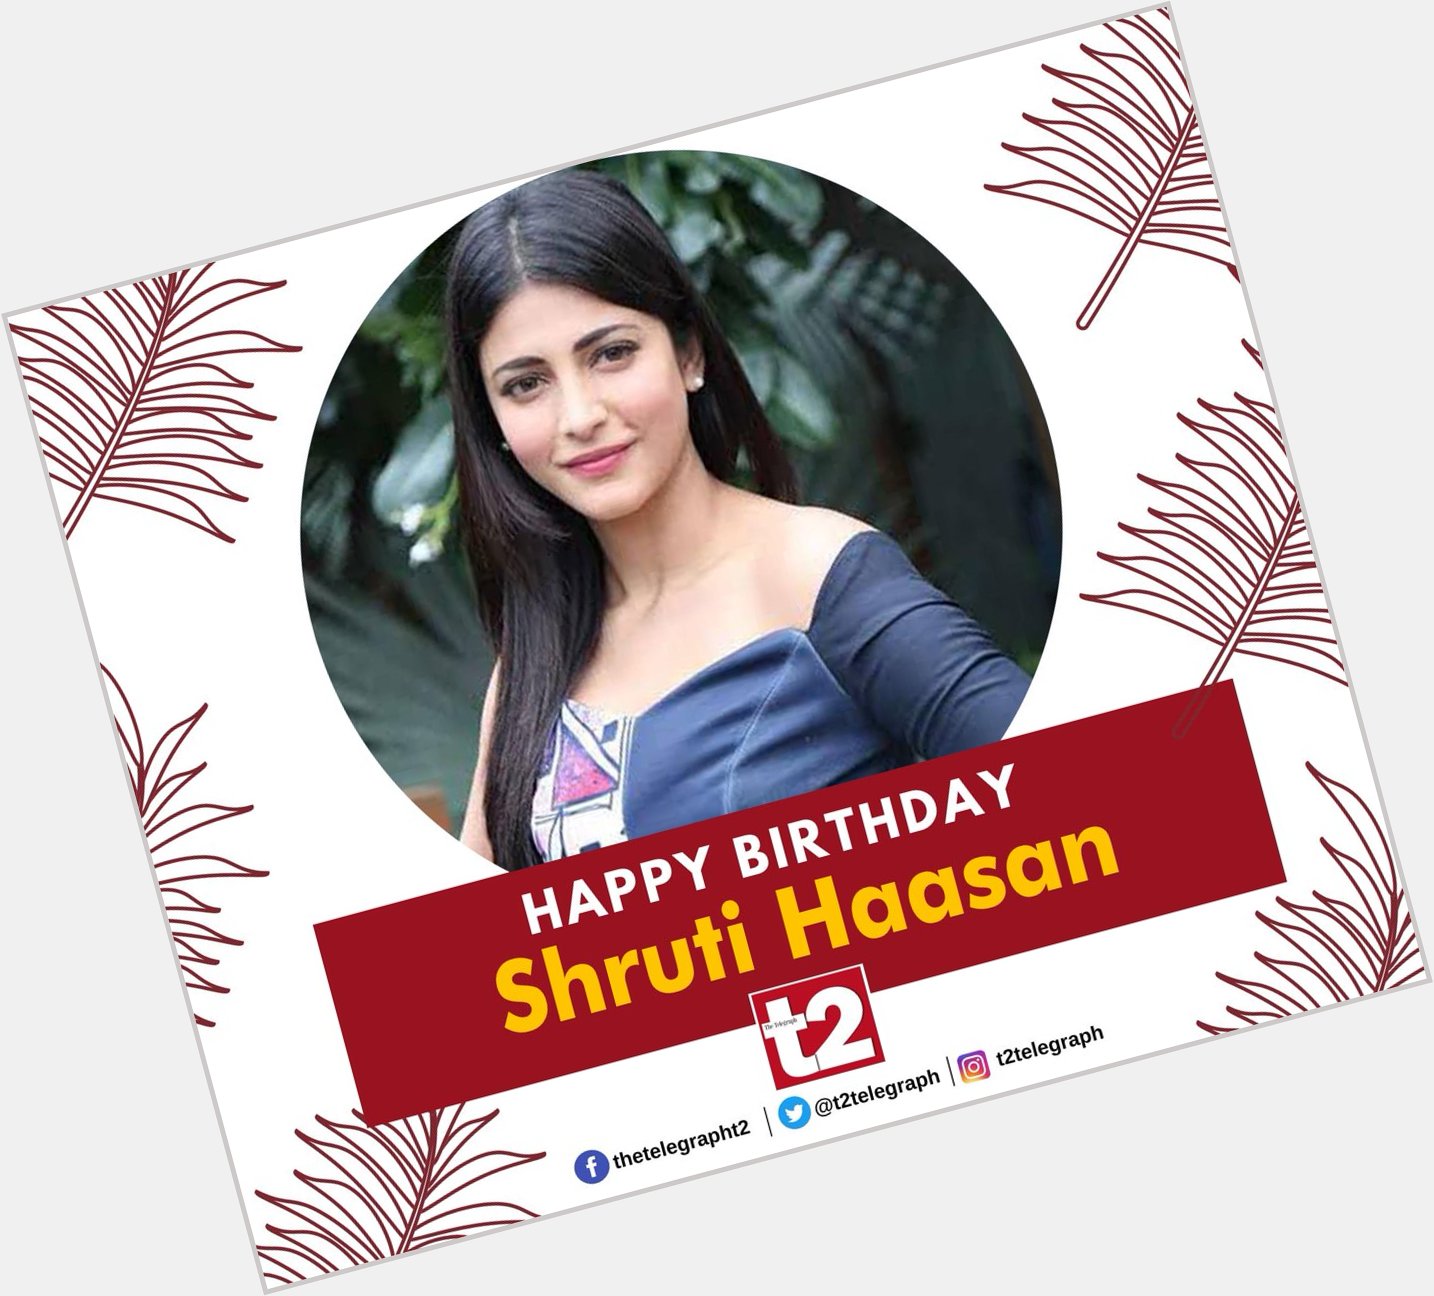 She s a rock star, on screen and off it. t2 wishes Shruti Haasan a very happy birthday 